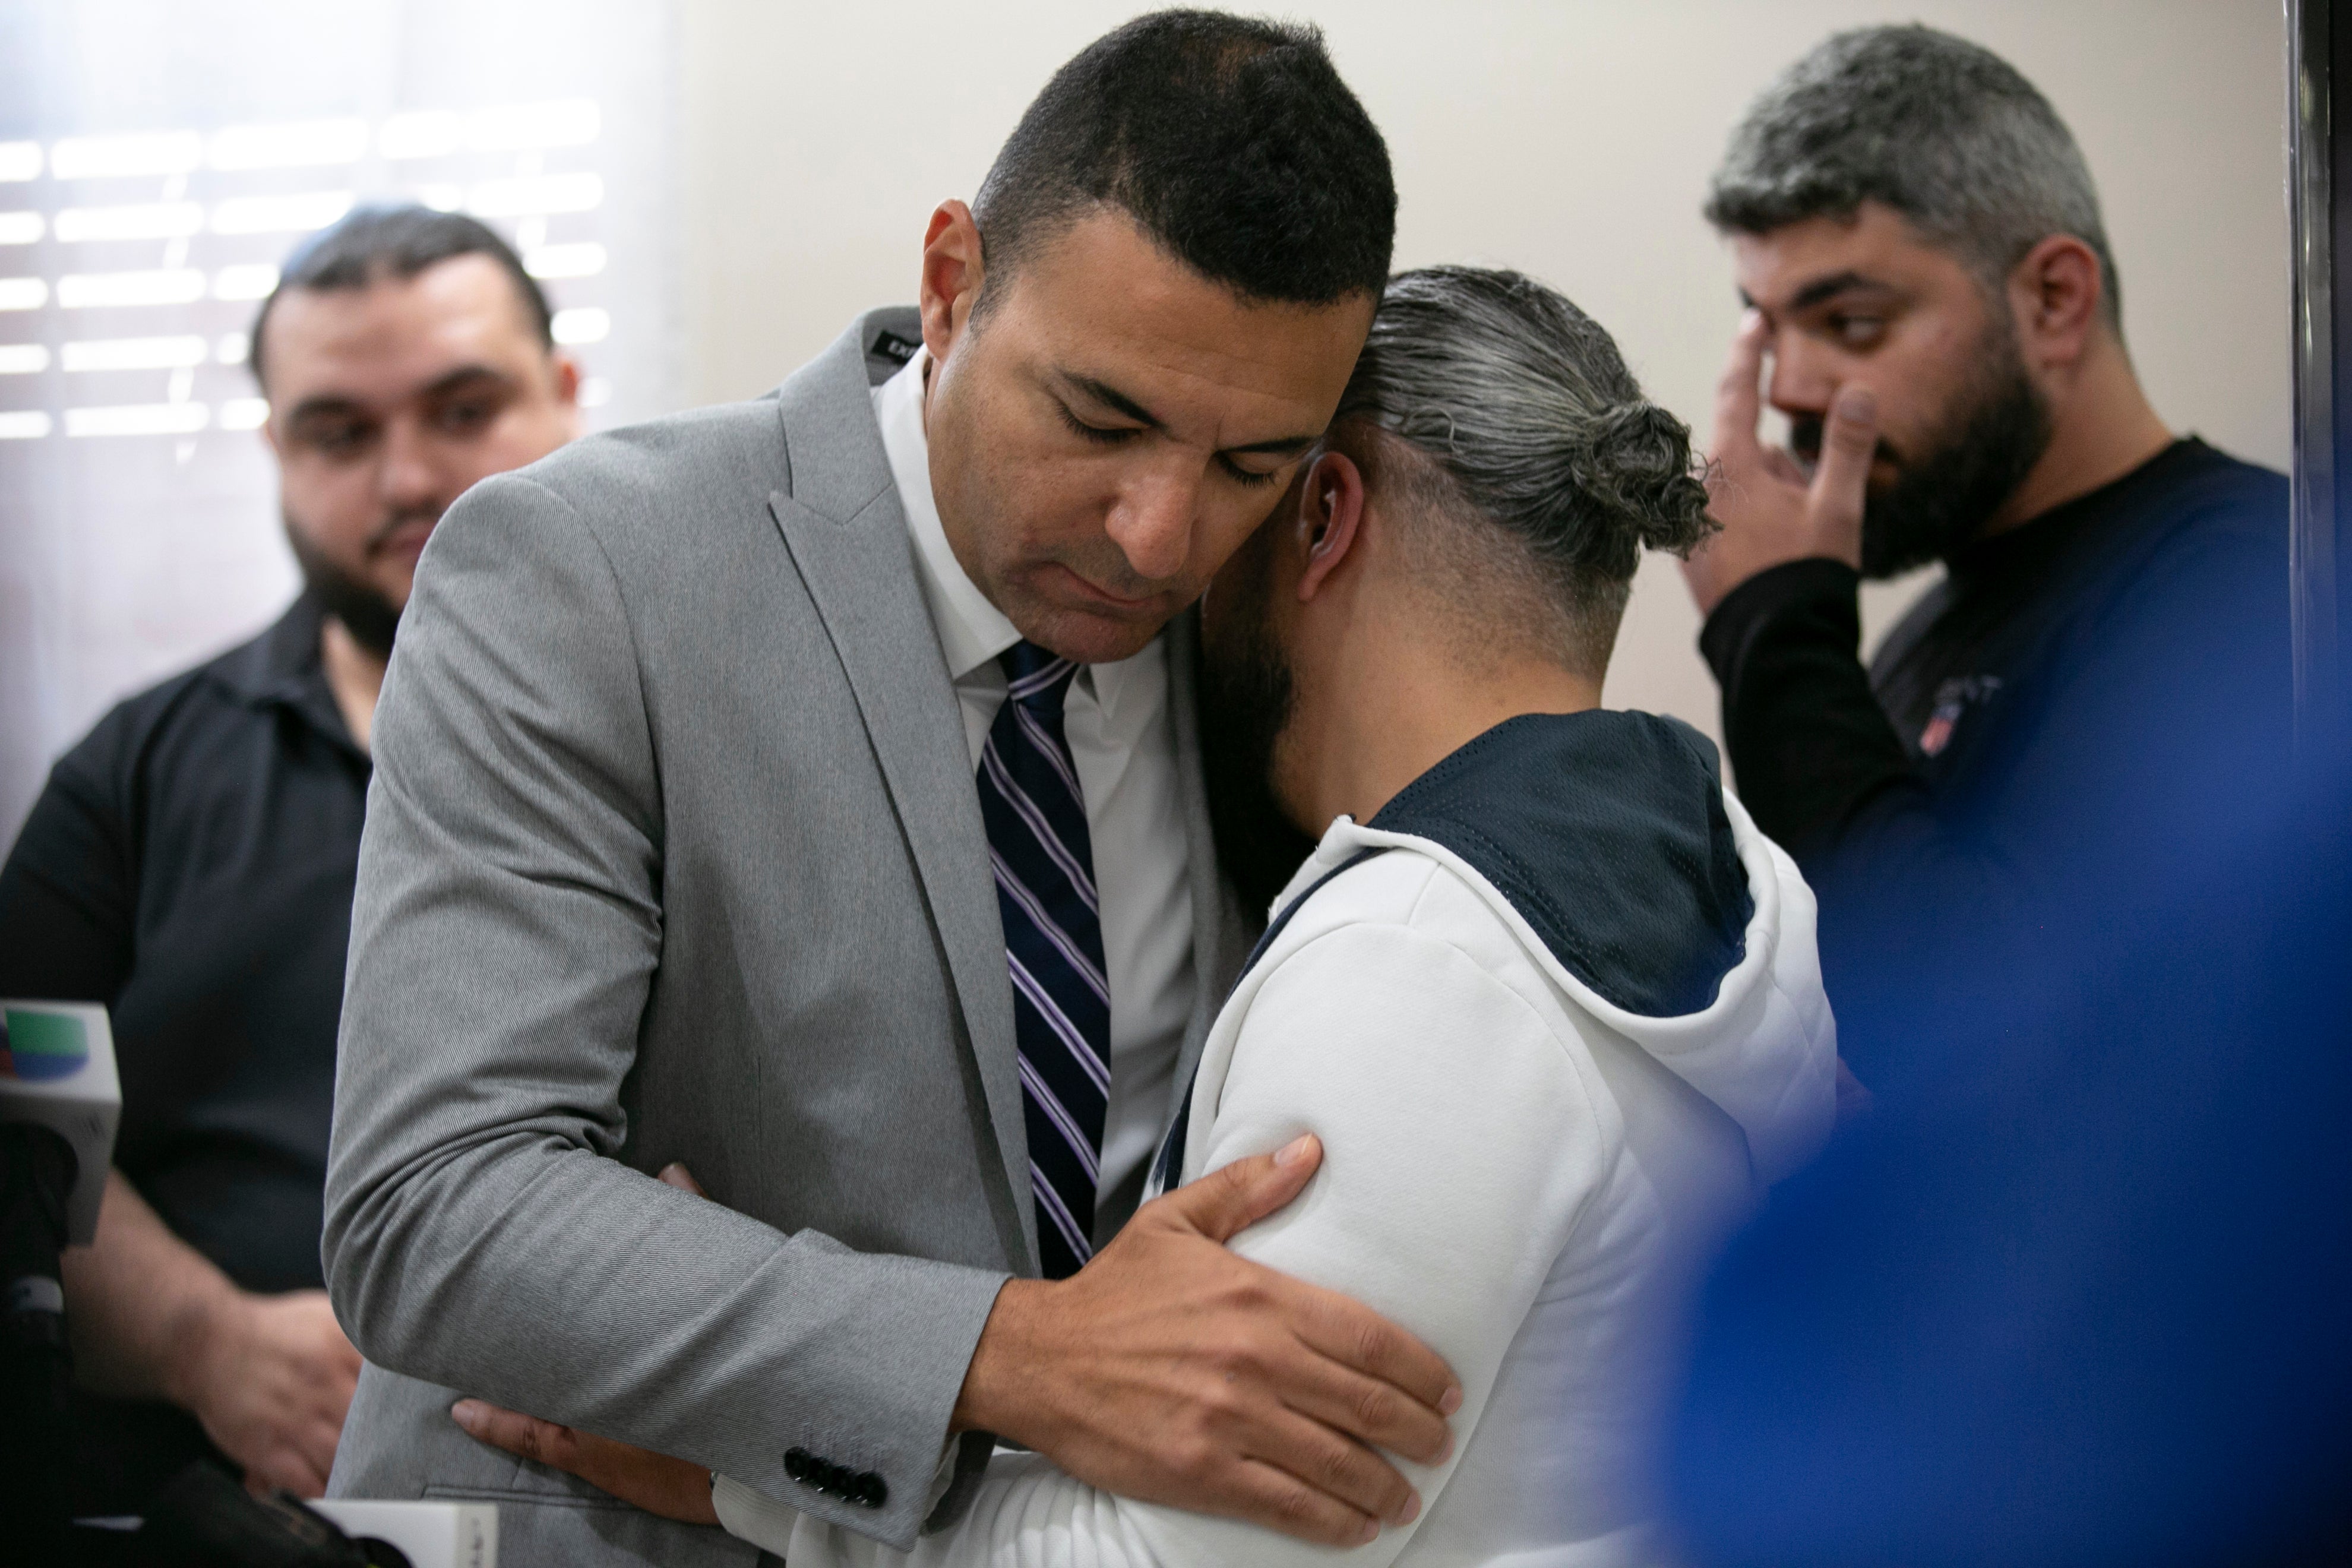 Ahmed Rehab, left, executive director of the Chicago chapter of the Council on American-Islamic Relations, embraces Odey Al-Fayoume, father of Wadea Al-Fayoume, 6